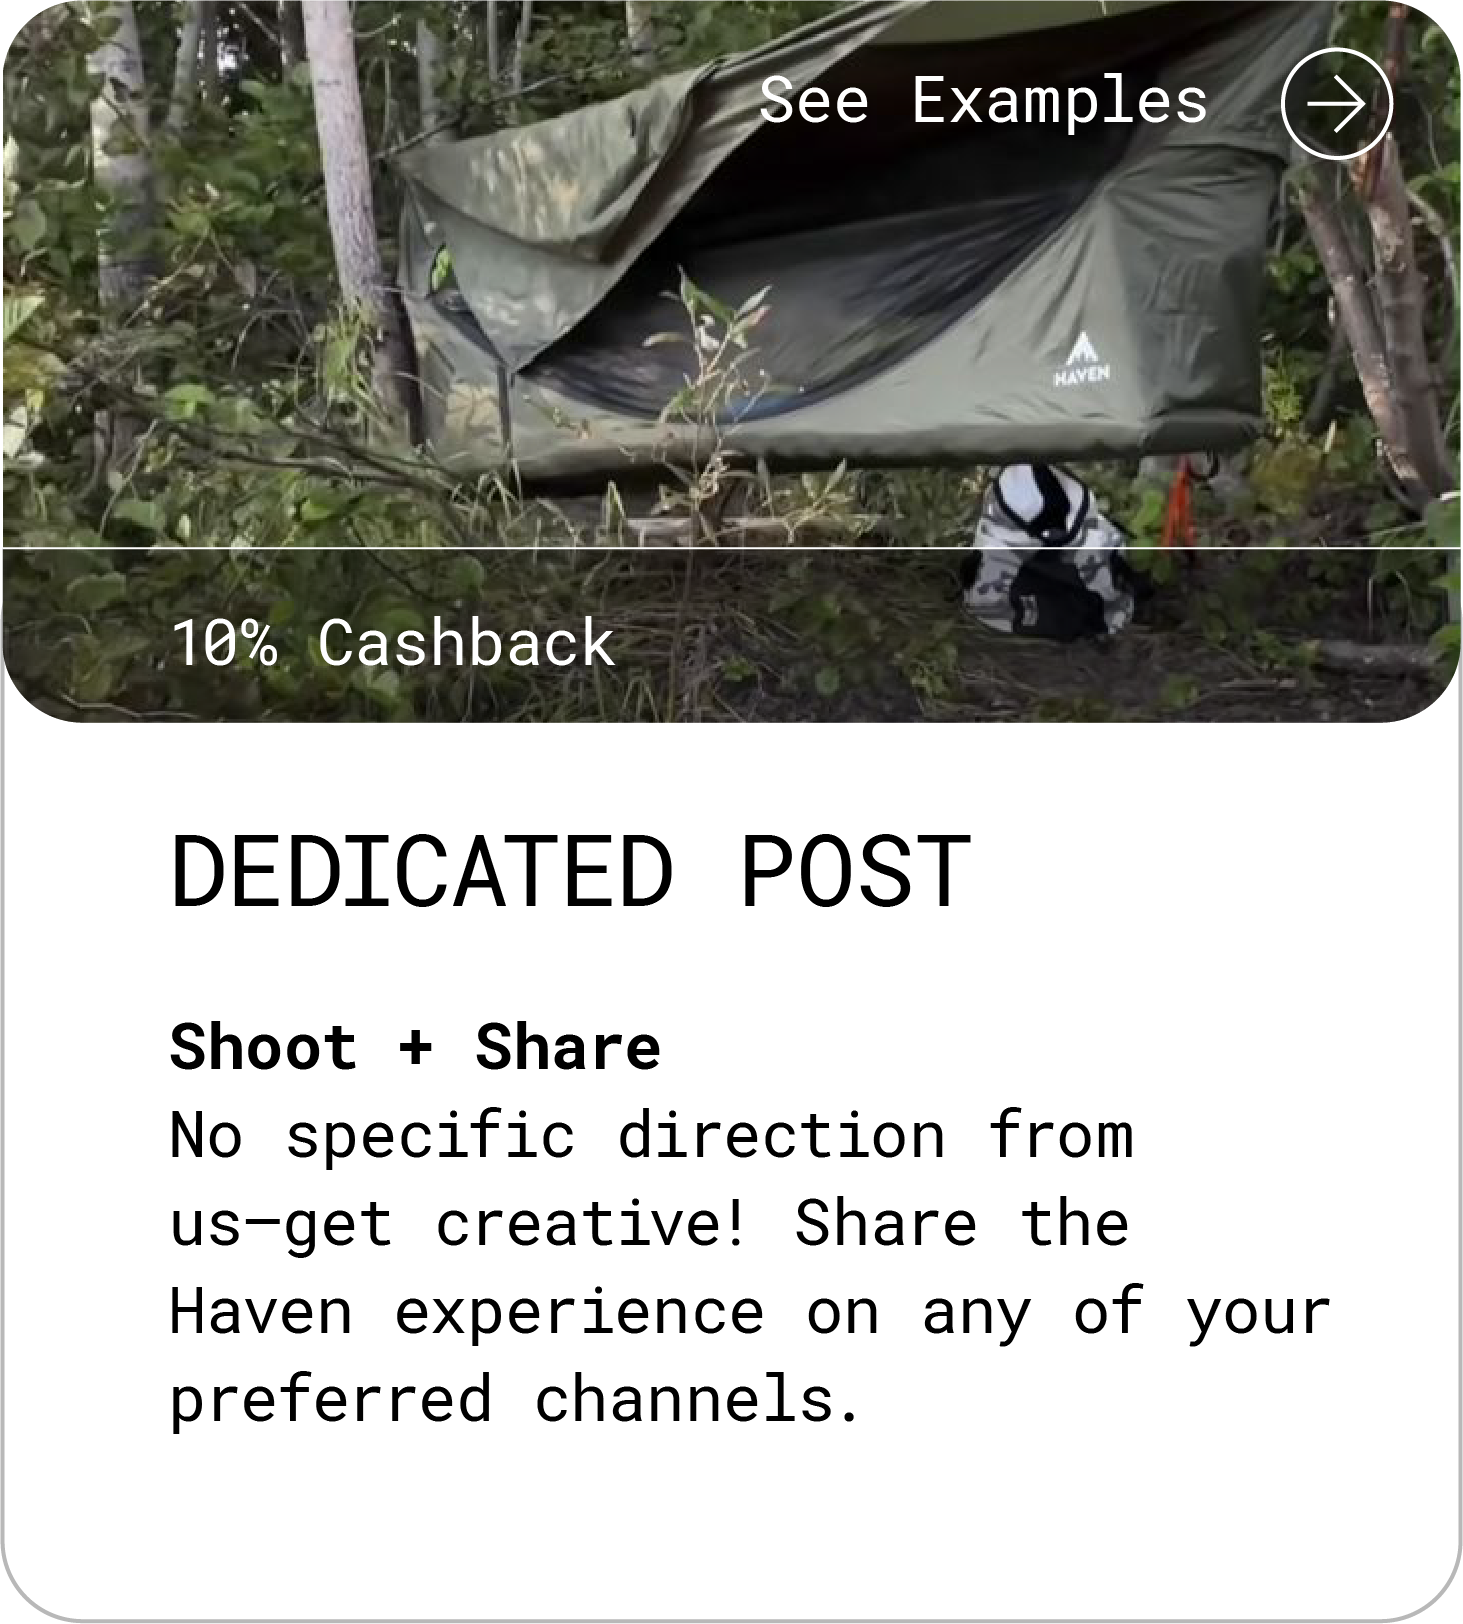 Dedicated Post (10% Cashback). Shoot + Share No specific direction from us—get creative! Share the Haven experience on any of your preferred channels. See Examples